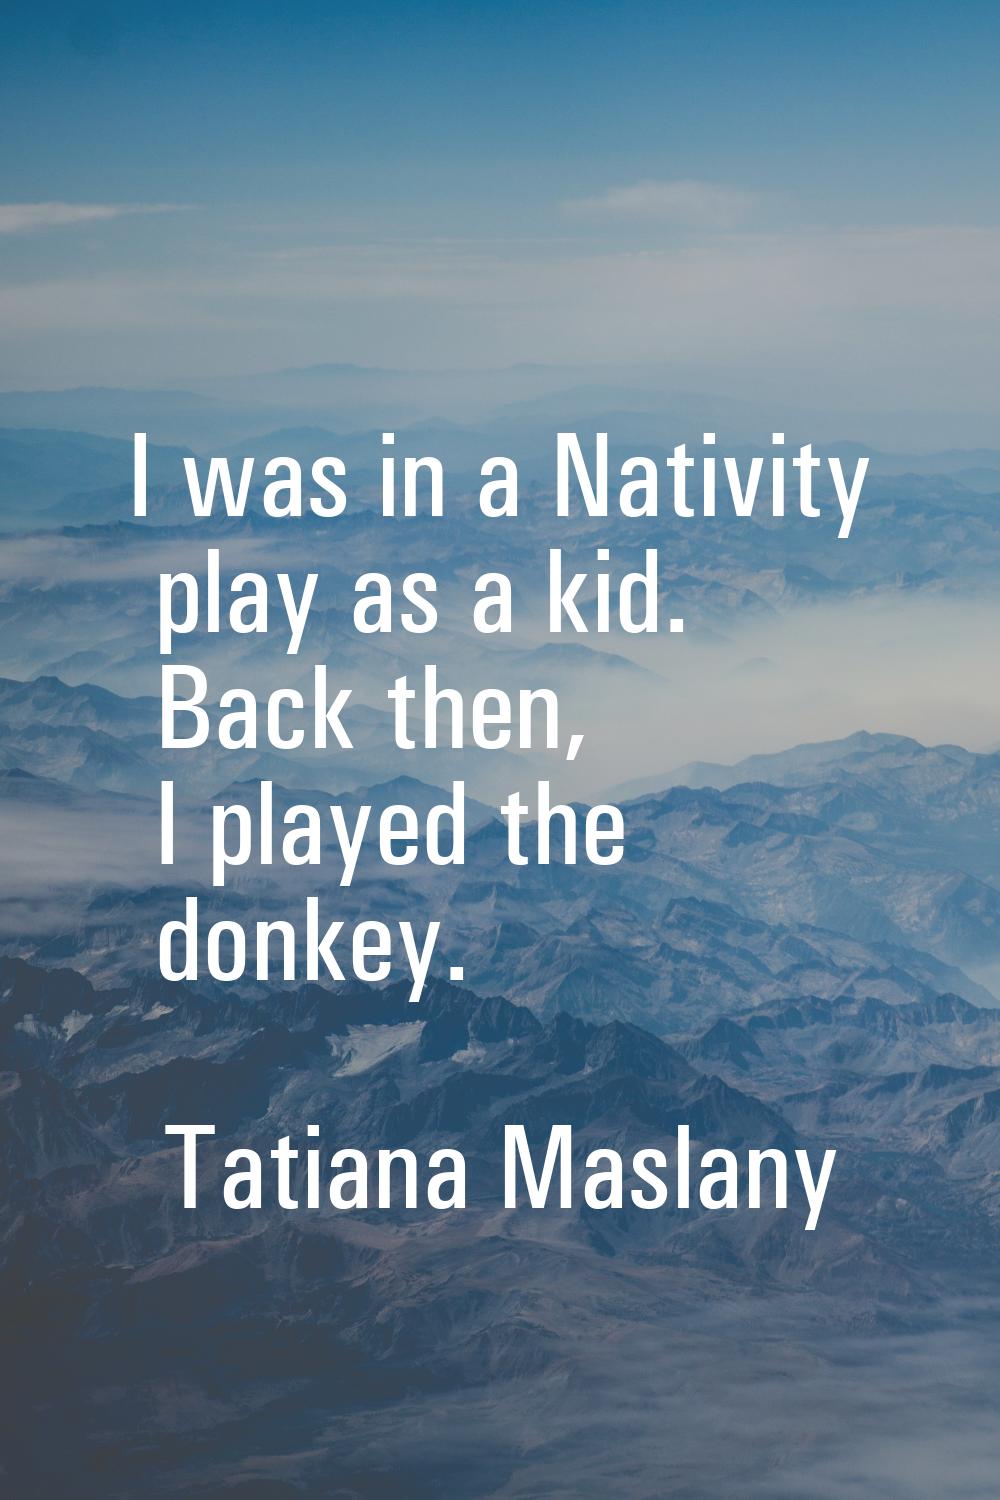 I was in a Nativity play as a kid. Back then, I played the donkey.